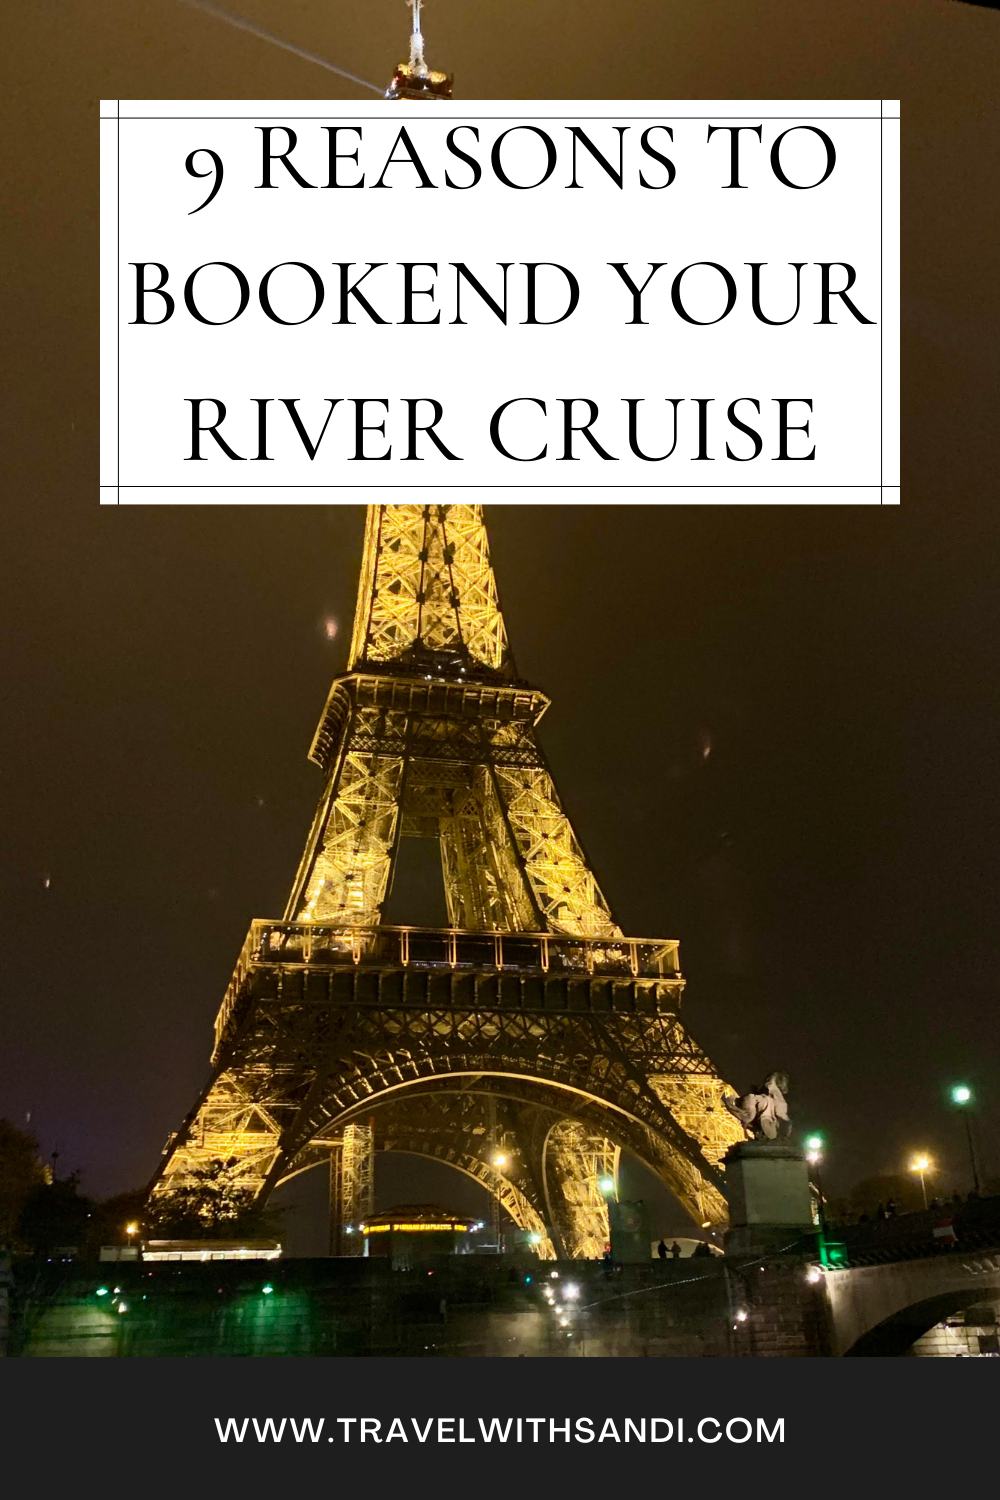 Reasons to bookend your river cruise